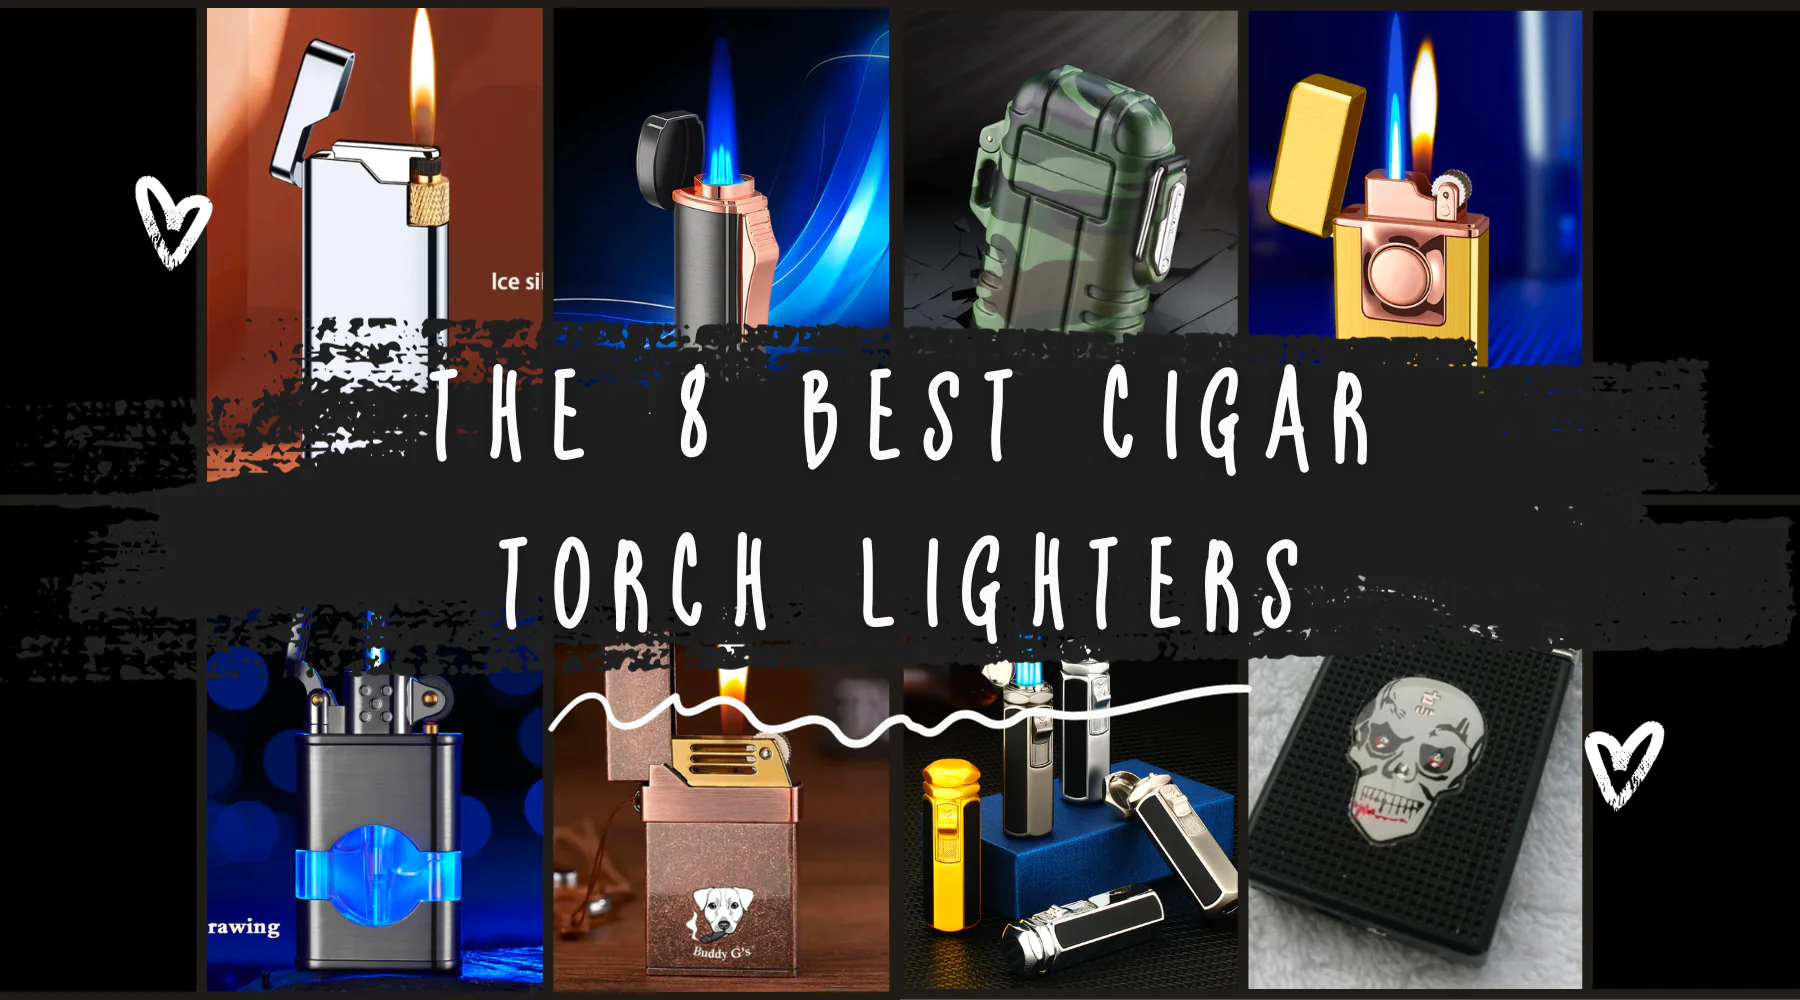 The 8 Best Cigar Torch Lighters for Lighting Your Cigars